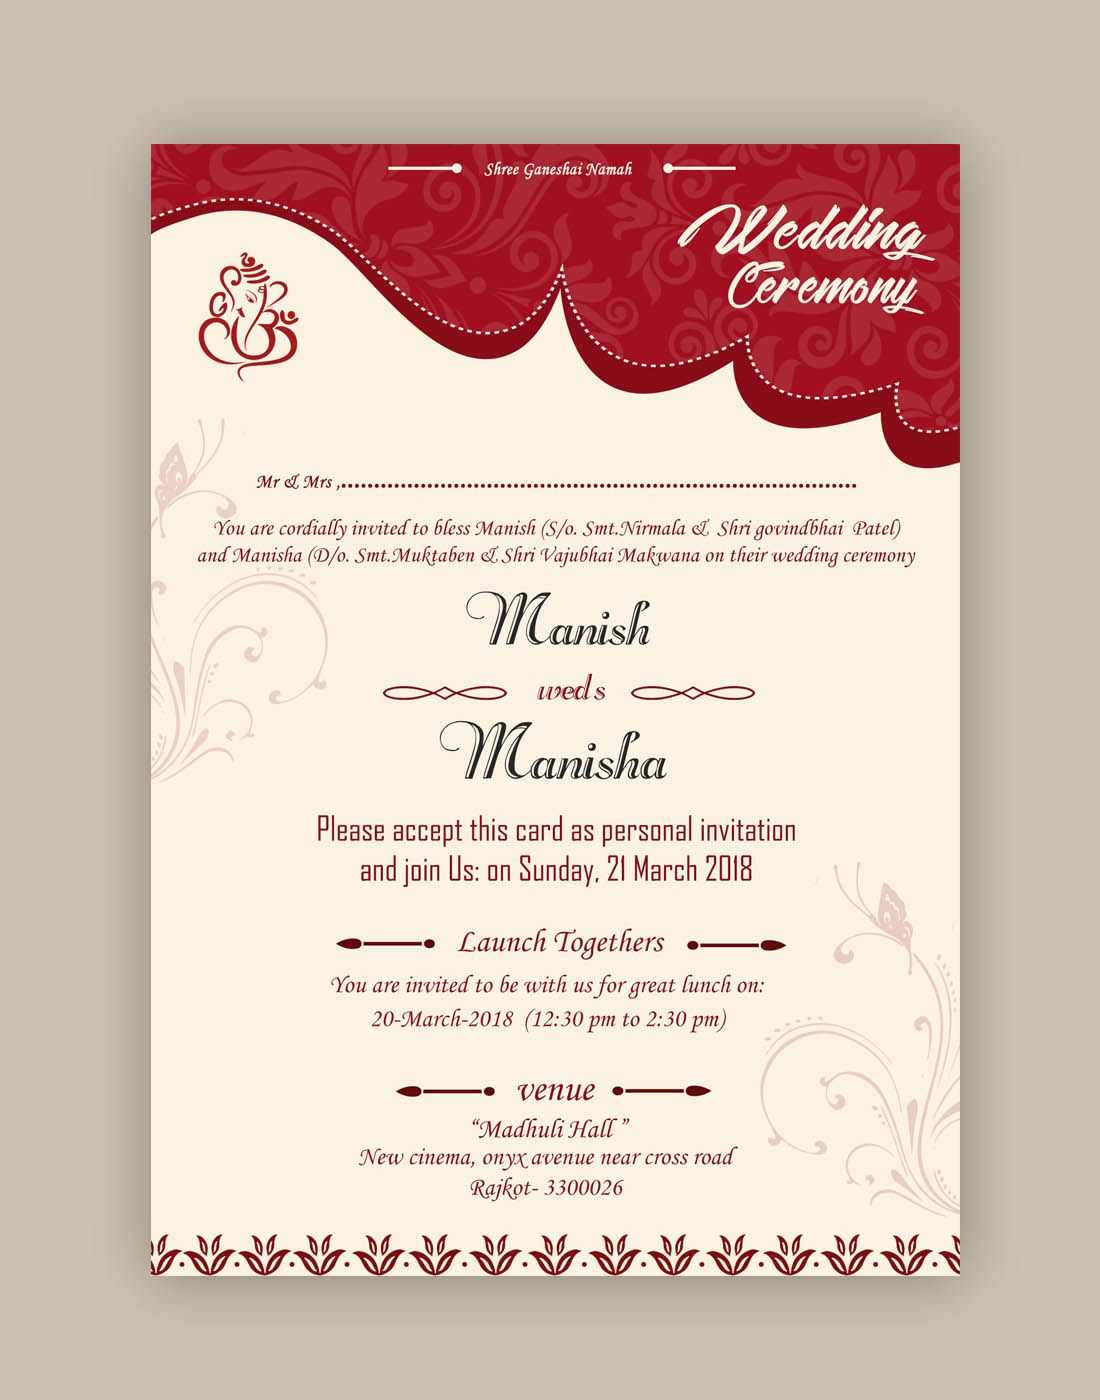 Free Wedding Card Psd Templates In 2019 | Free Wedding Cards Pertaining To Free E Wedding Invitation Card Templates